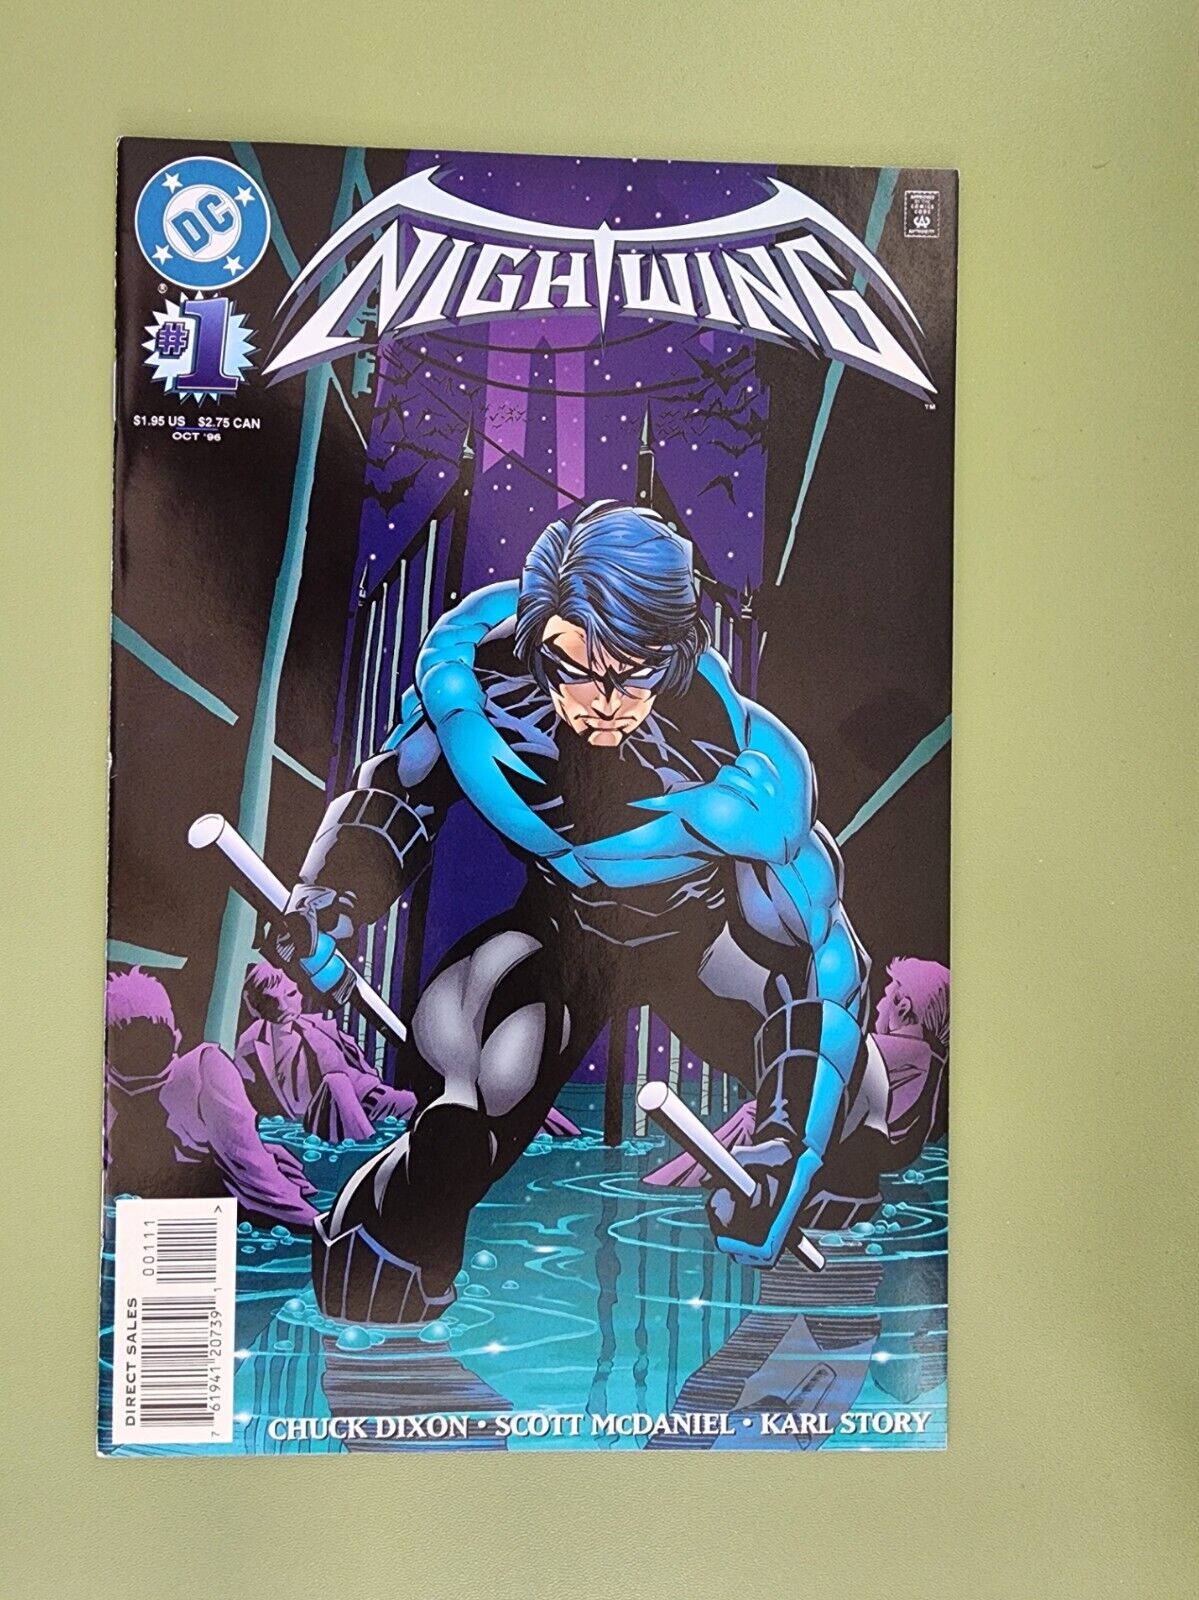 Nightwing #1 - DC Comics Oct \'96 KEY - 1st Solo Series - 1st Bludhaven - NM- 9.2